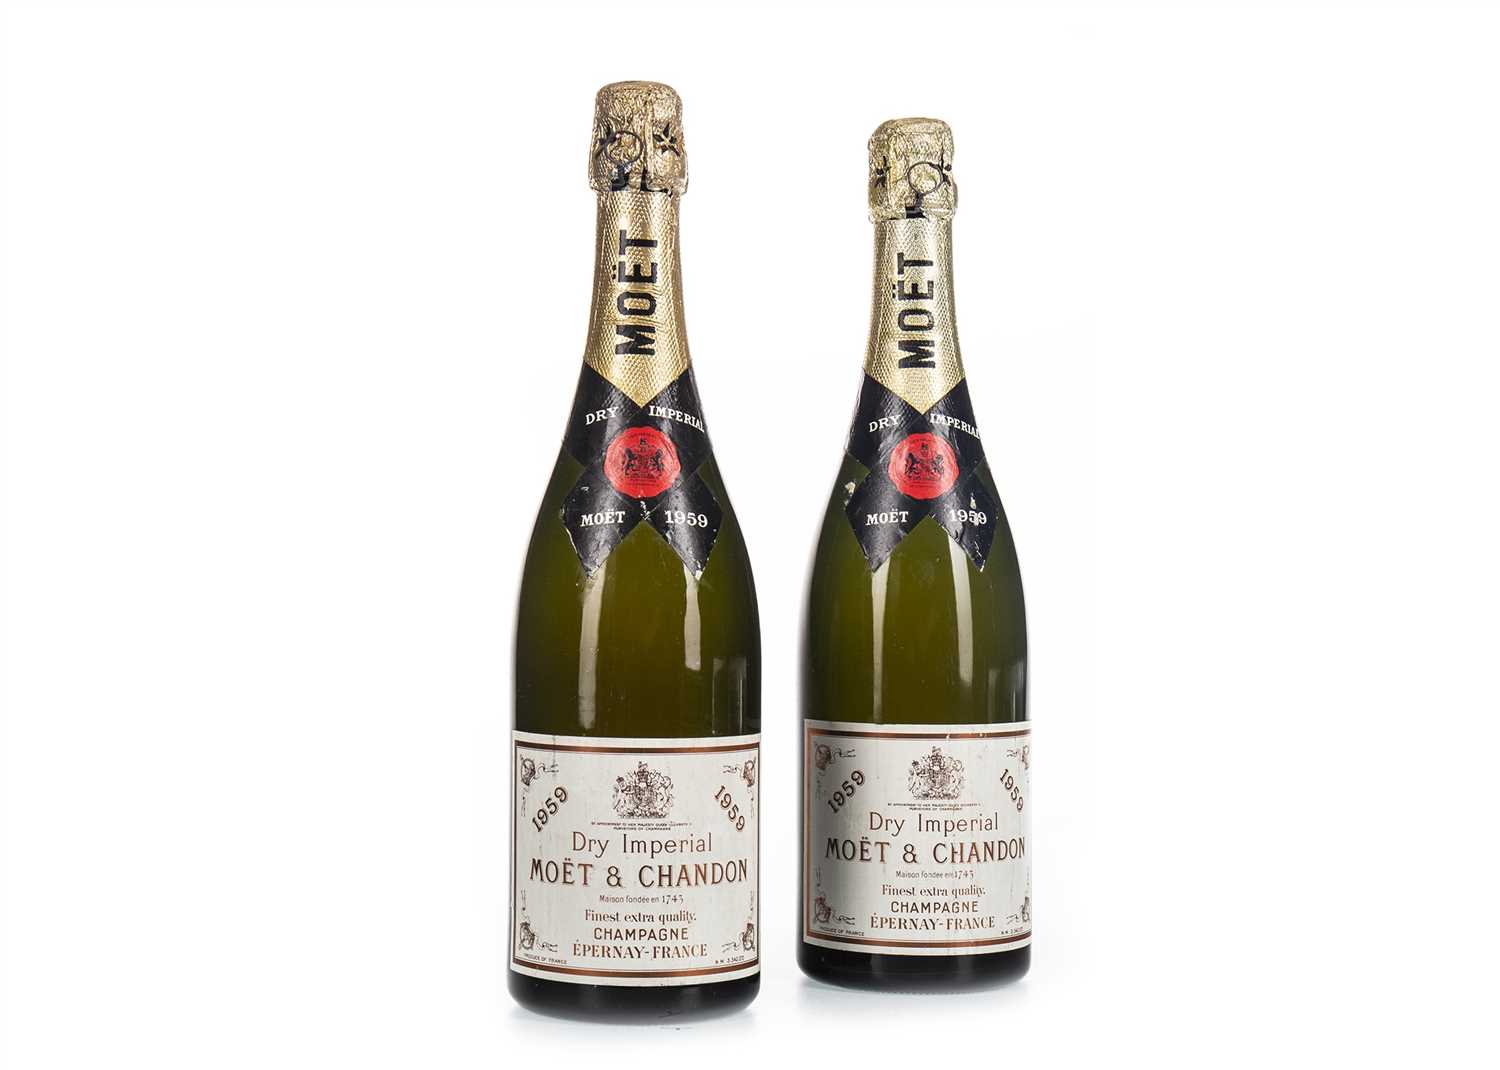 Lot 1031 - MOET & CHANDON 1959 DRY IMPERIAL (2)